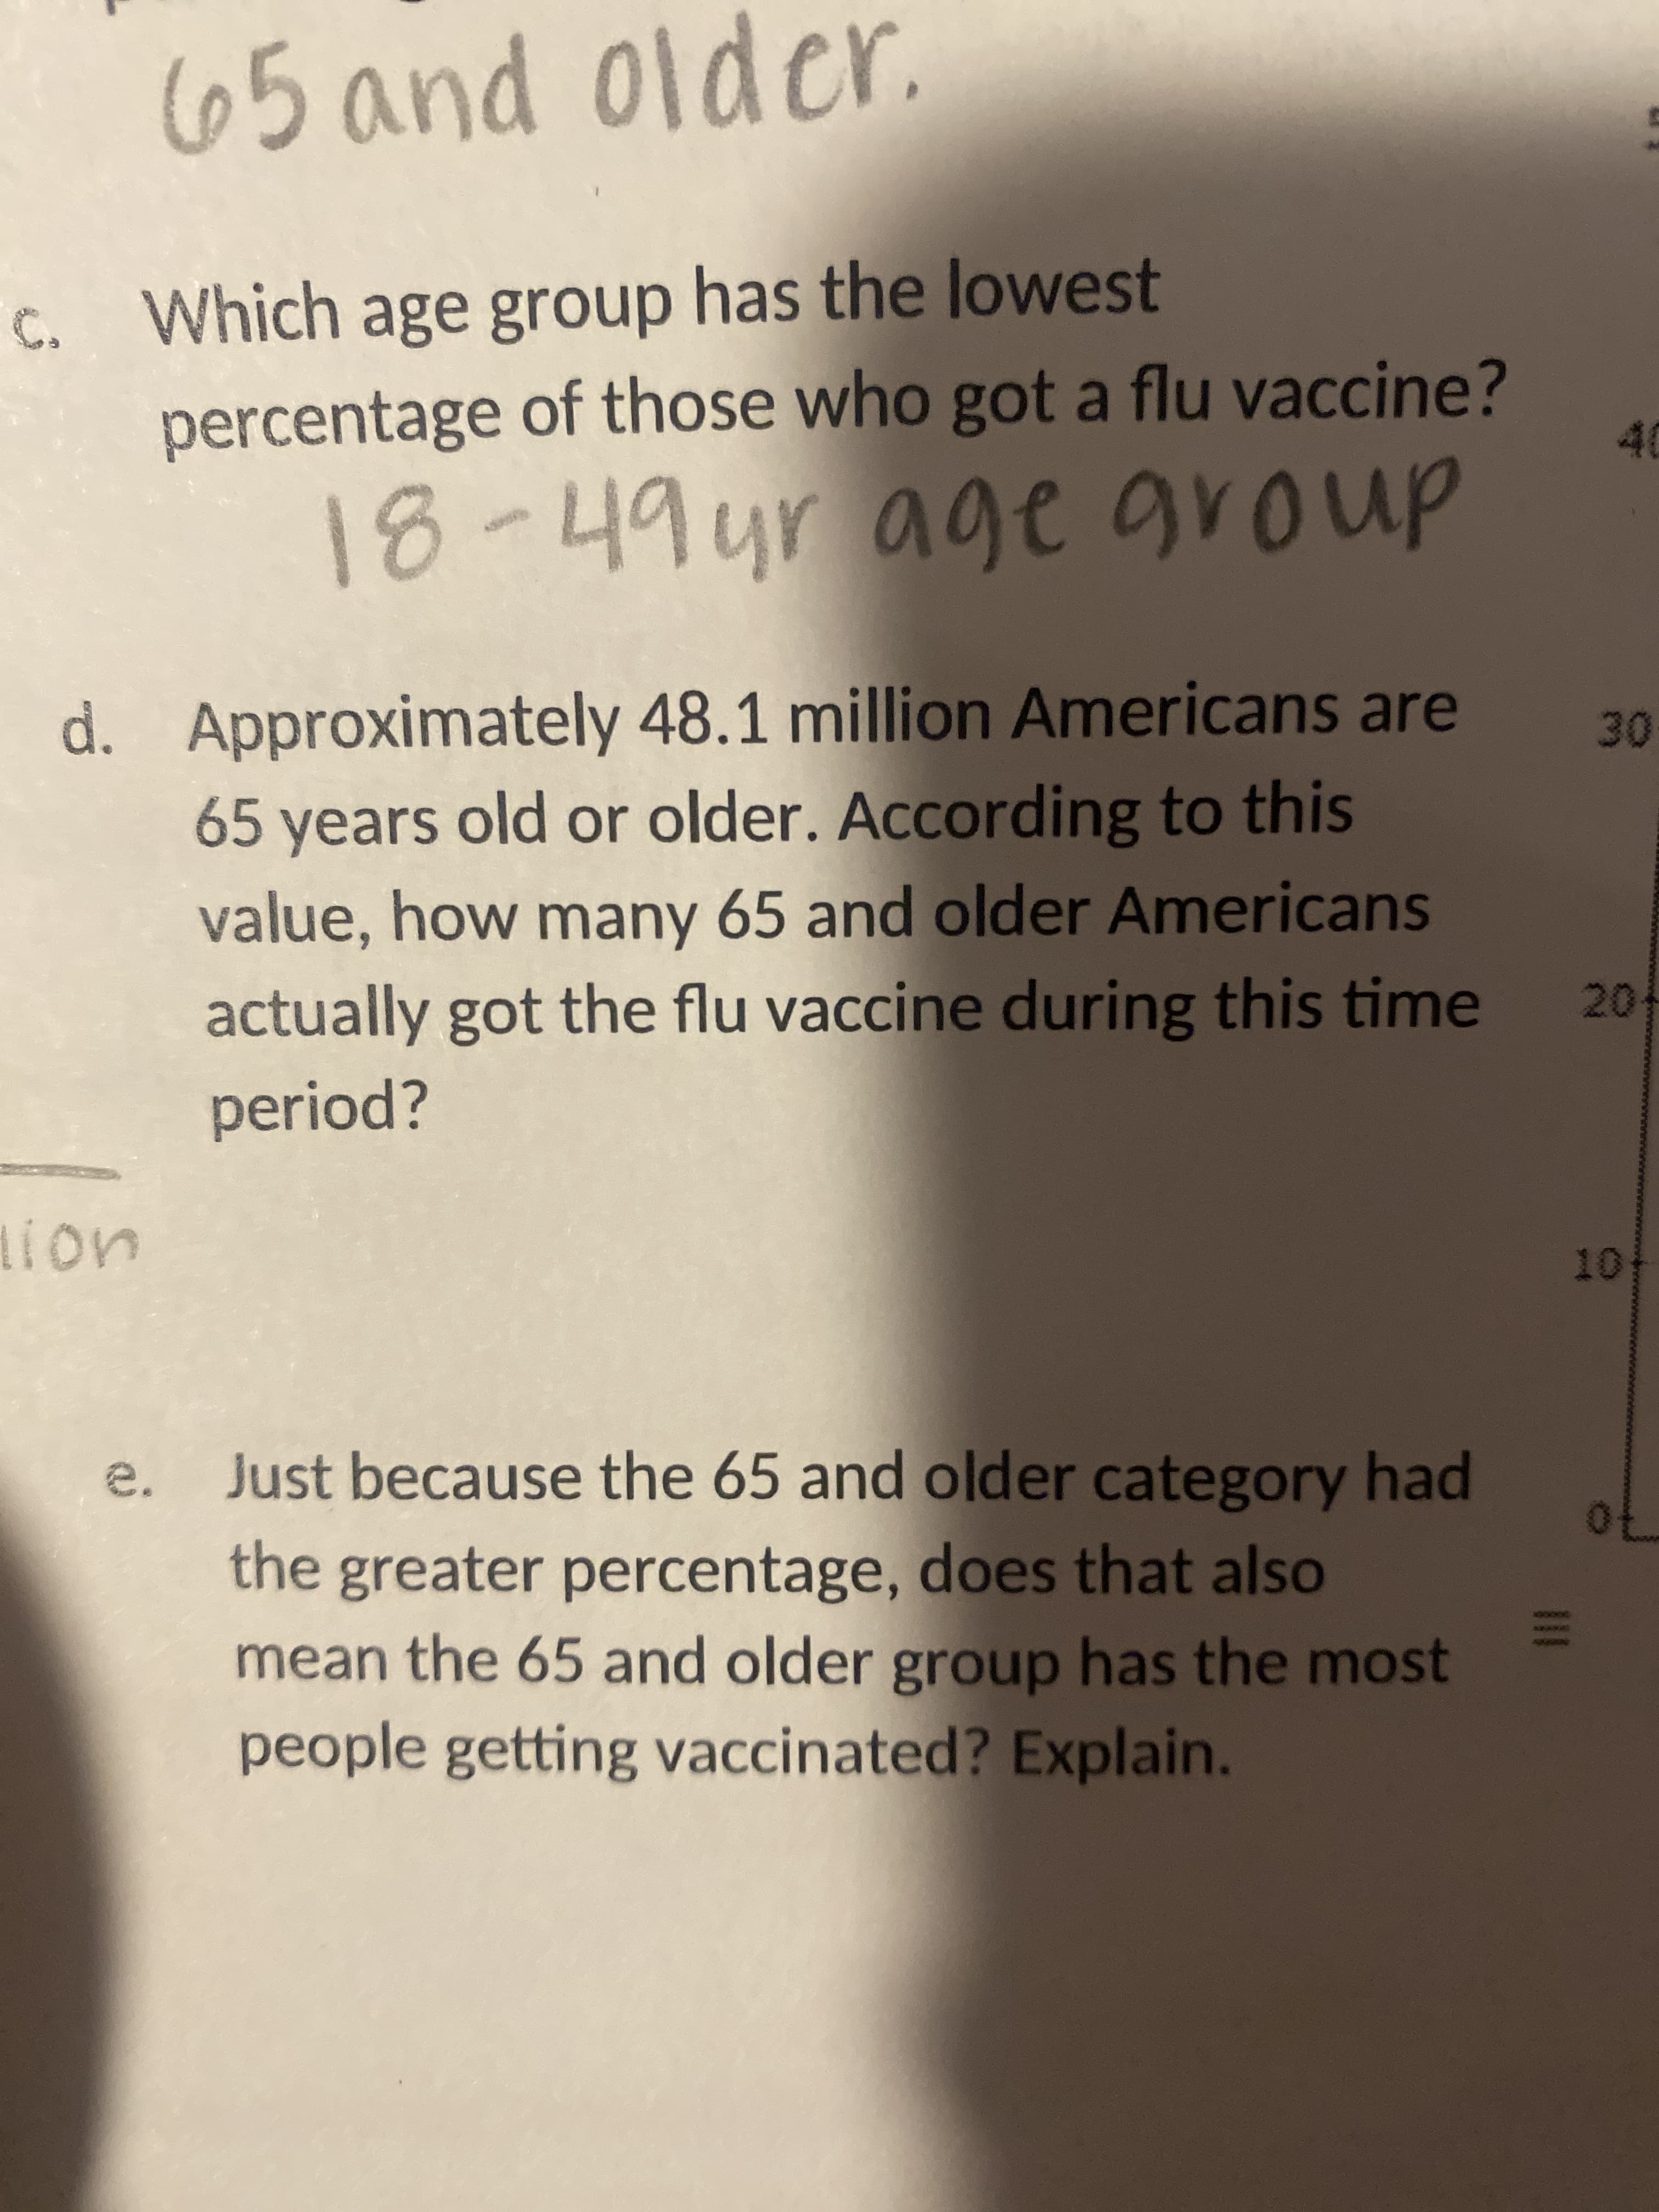 665 and older.
Which age group has the lowest
percentage of those who got a flu vaccine?
b
18-49yr age group
40
d. Approximately 48.1 million Americans are
65 years old or older. According to this
value, how many 65 and older Americans
actually got the flu vaccine during this time
20+
period?
e.
Just because the 65 and older category had
the greater percentage, does that also
70
mean the 65 and older group has the most
11
people getting vaccinated? Explain.
